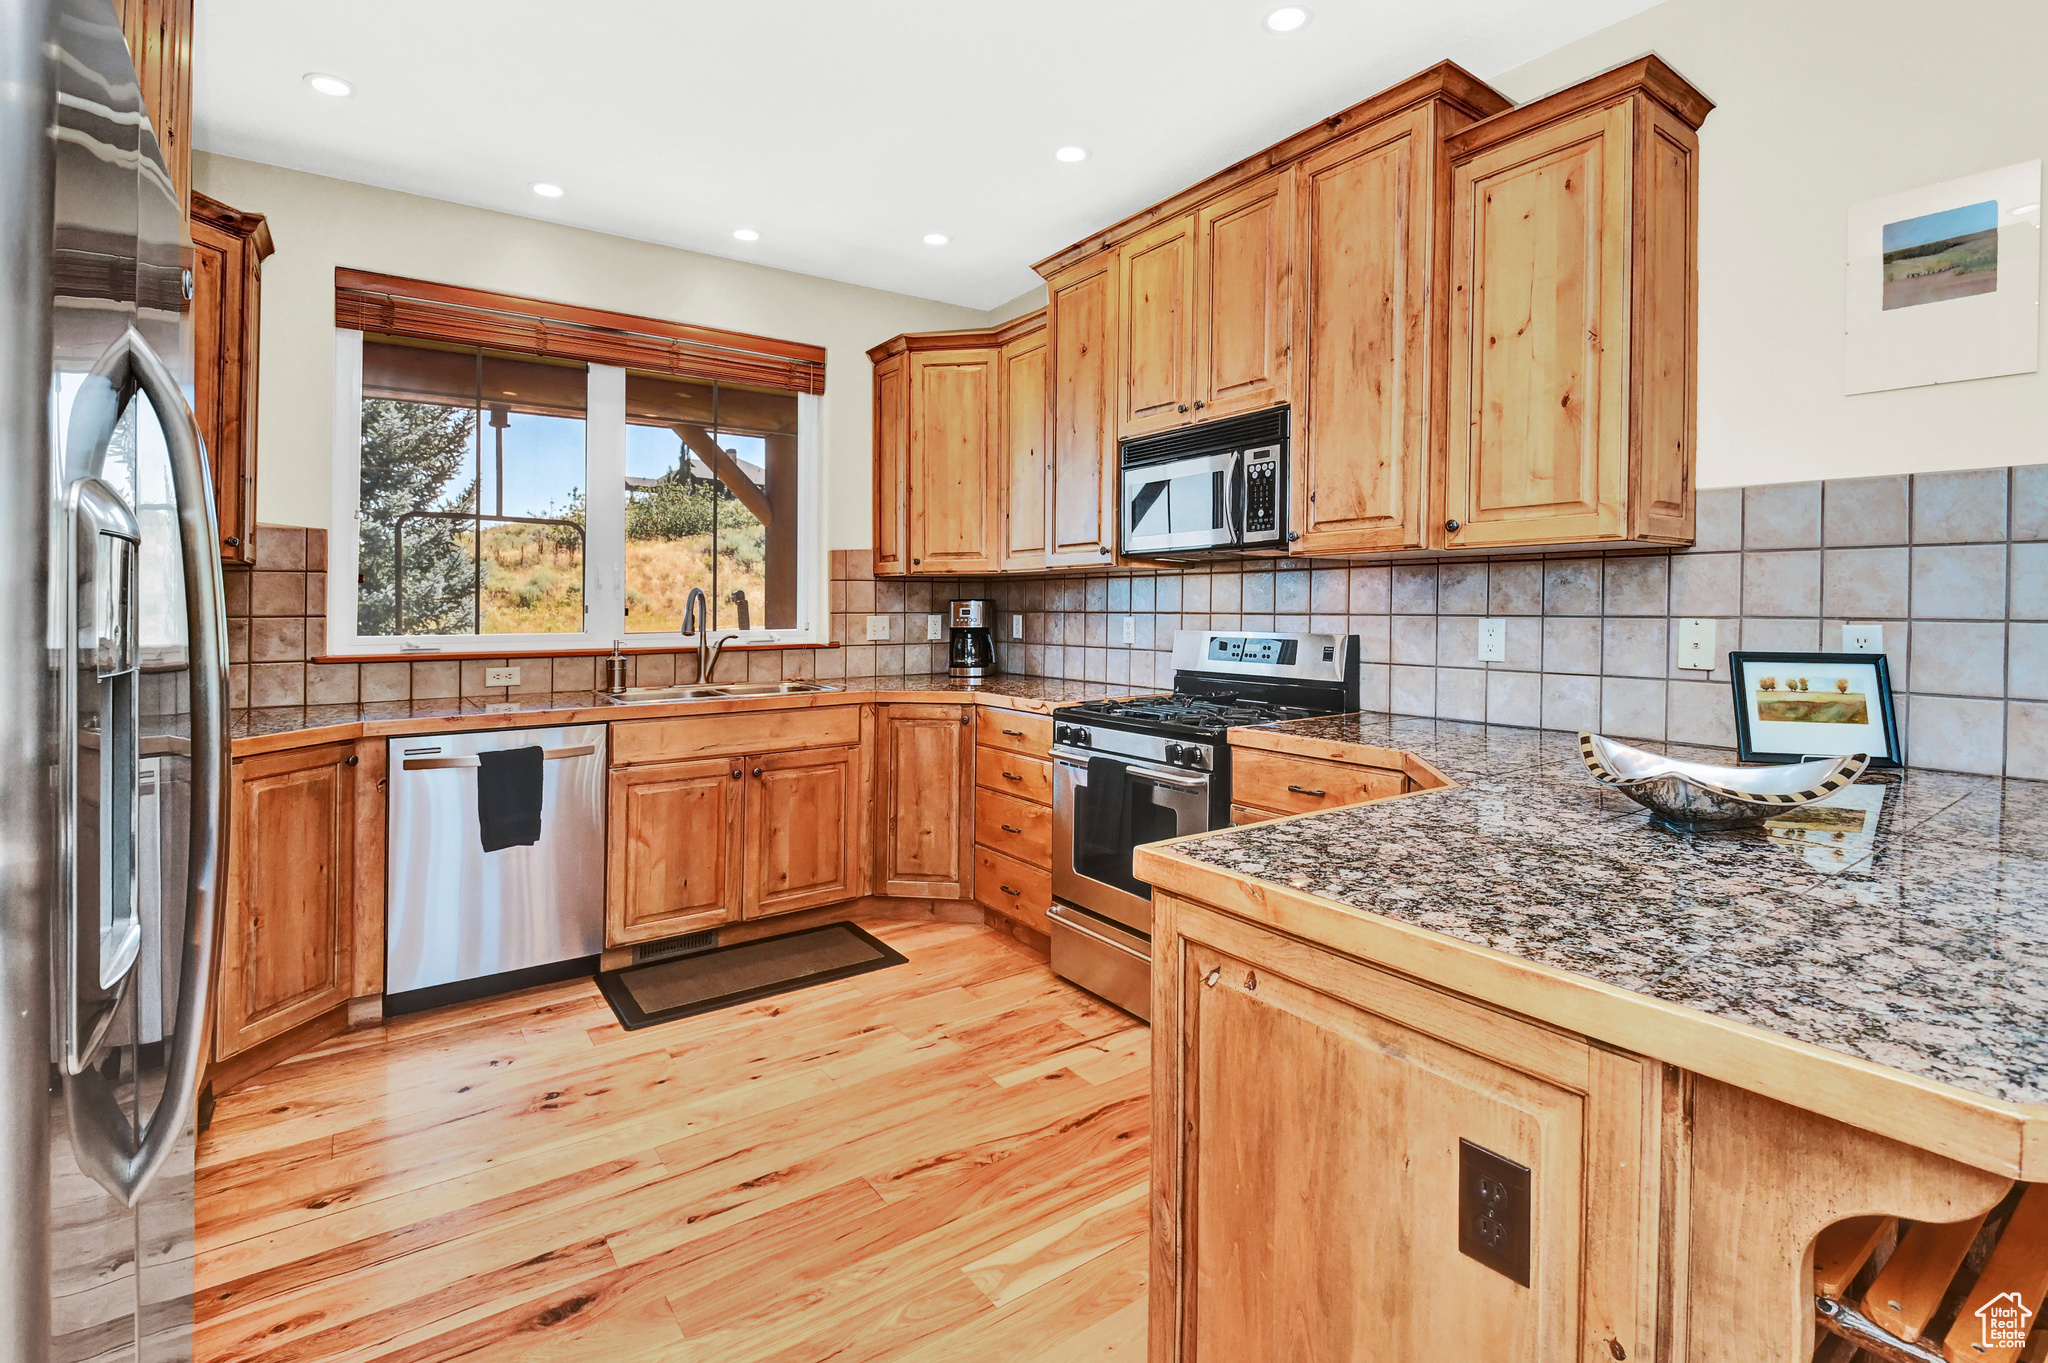 Stainless steel appliances, alder cabinets including pantry cabinets and lazy susans.